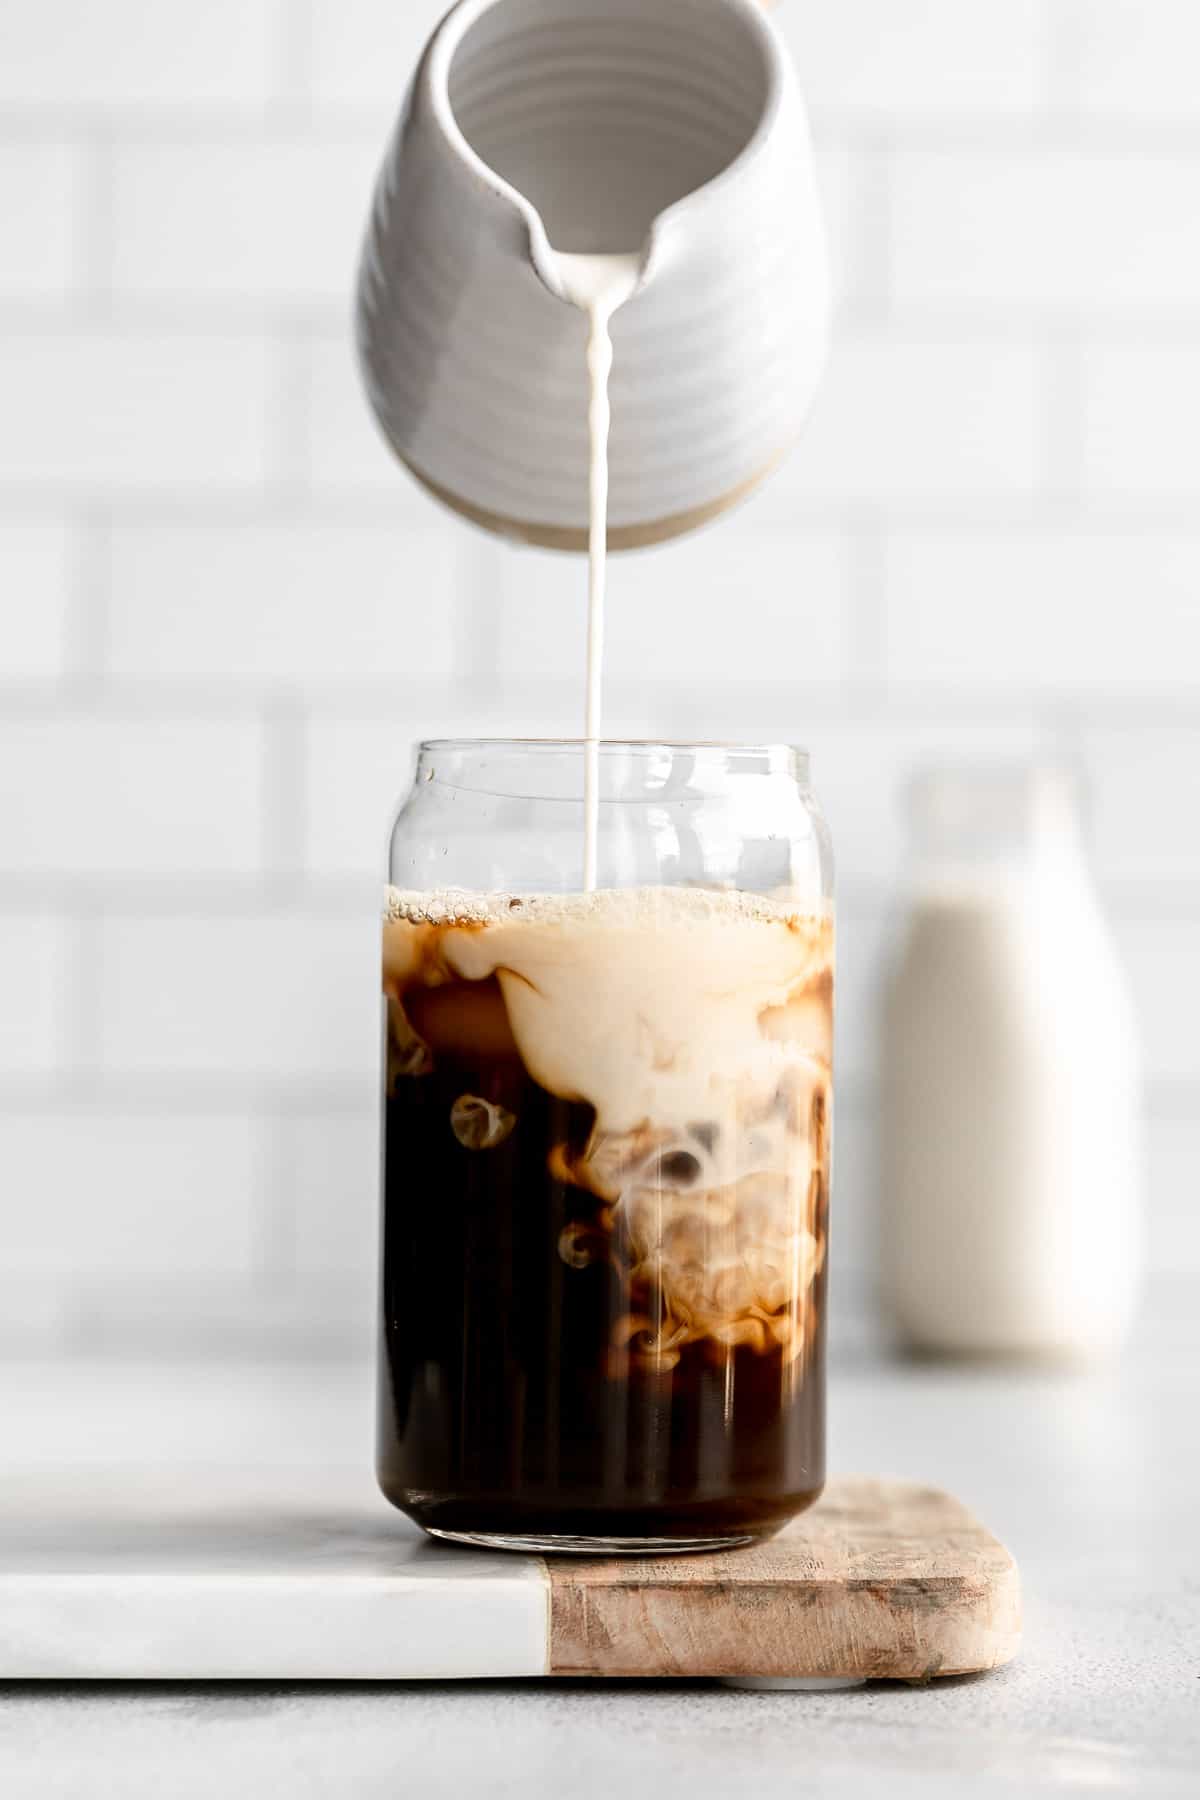 pouring the homemade walnut milk in a cup of iced coffee